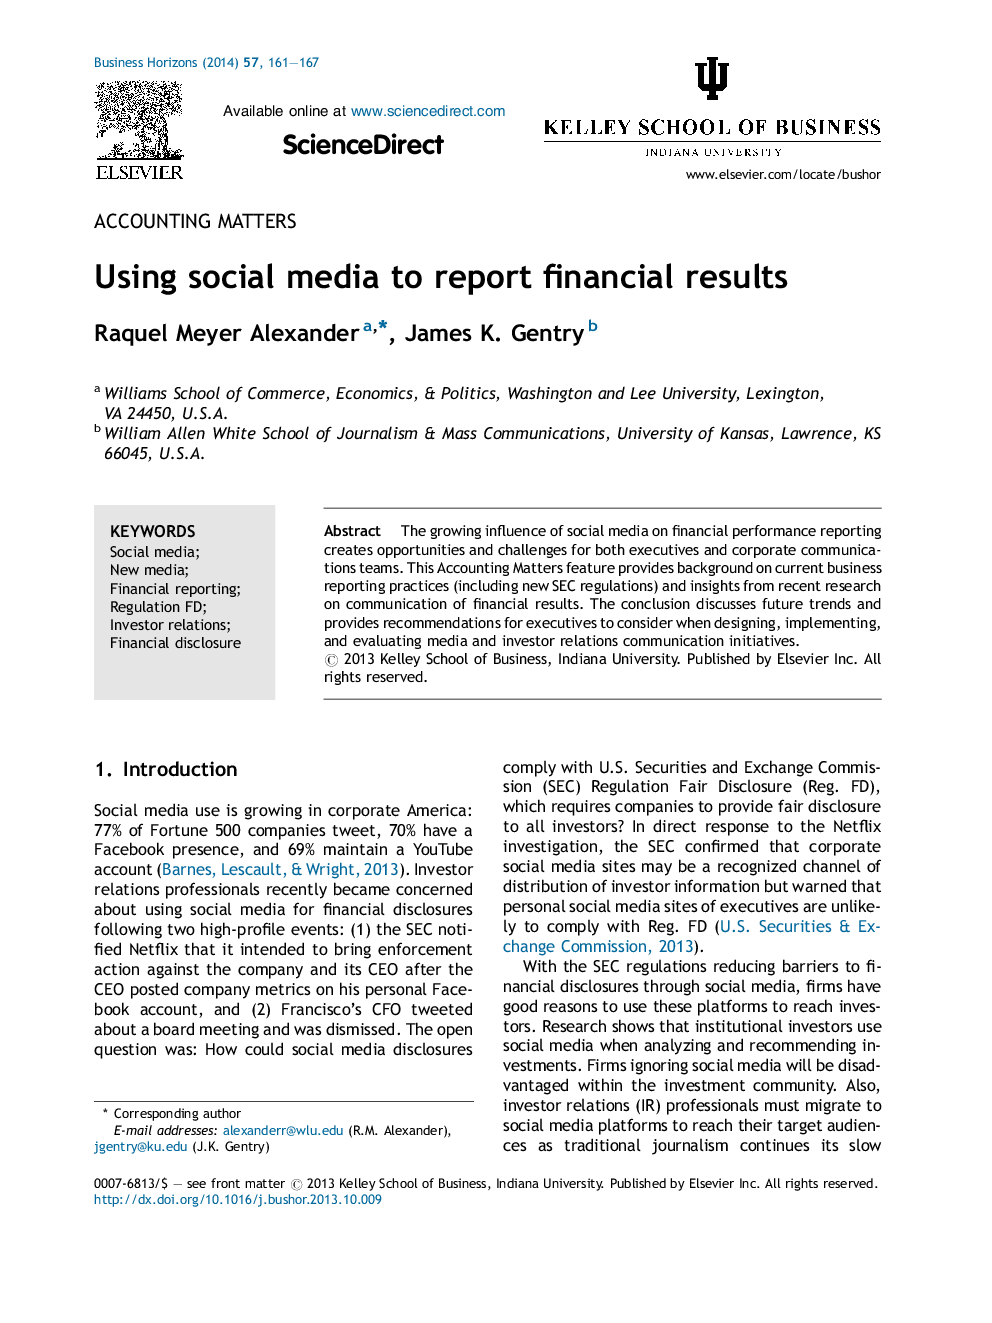 Using social media to report financial results